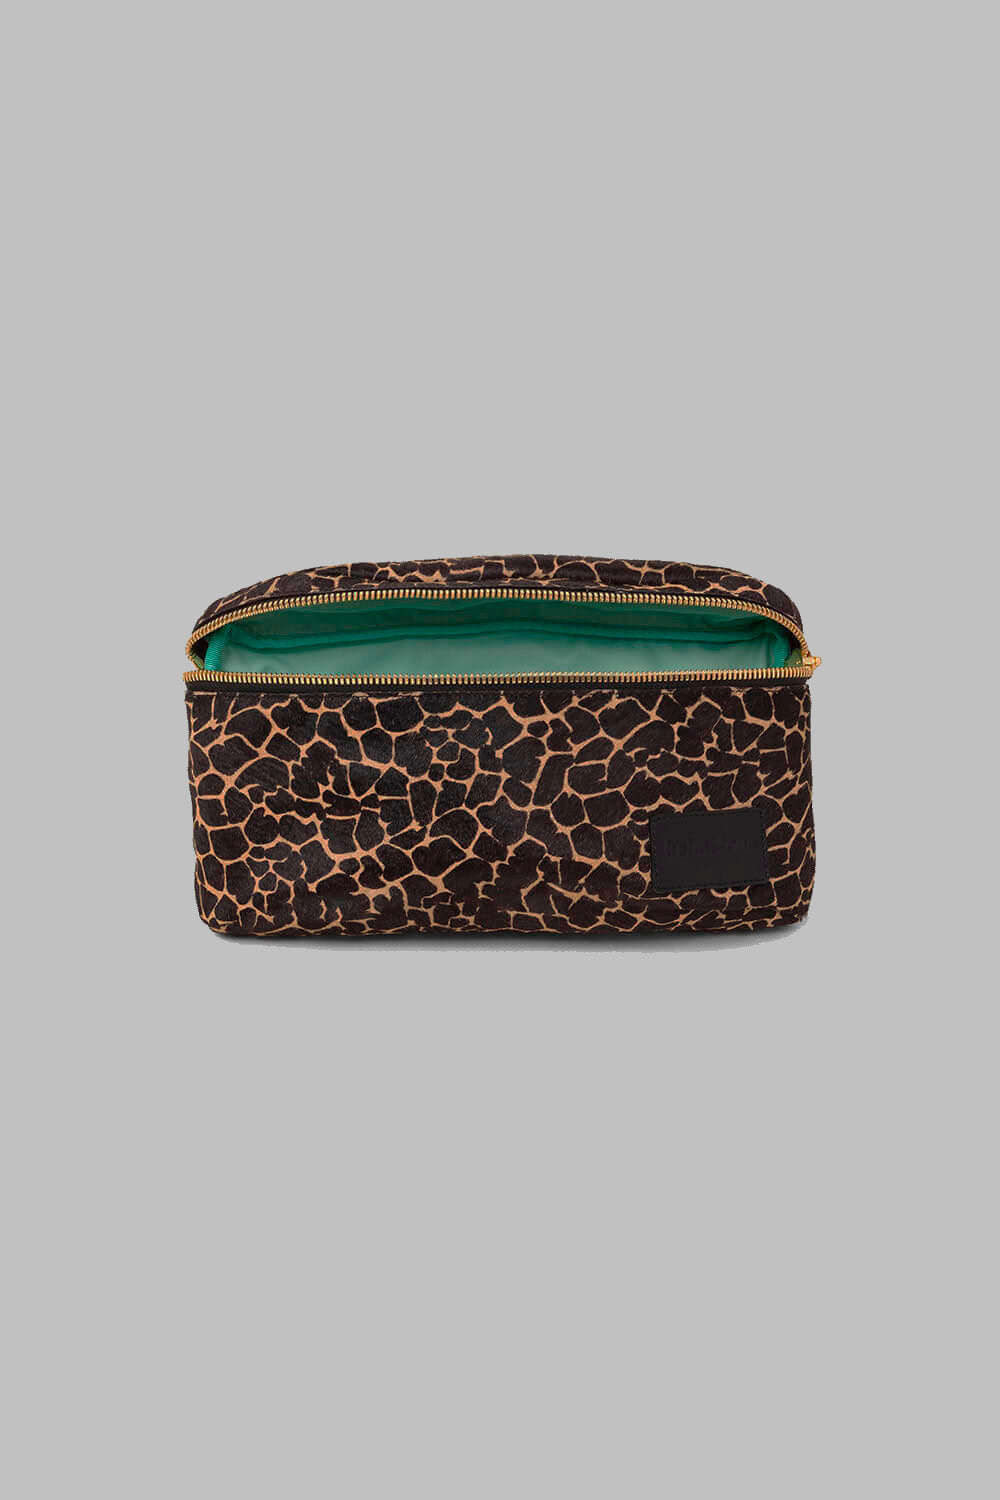 Fanny pack in giraffe printed leather